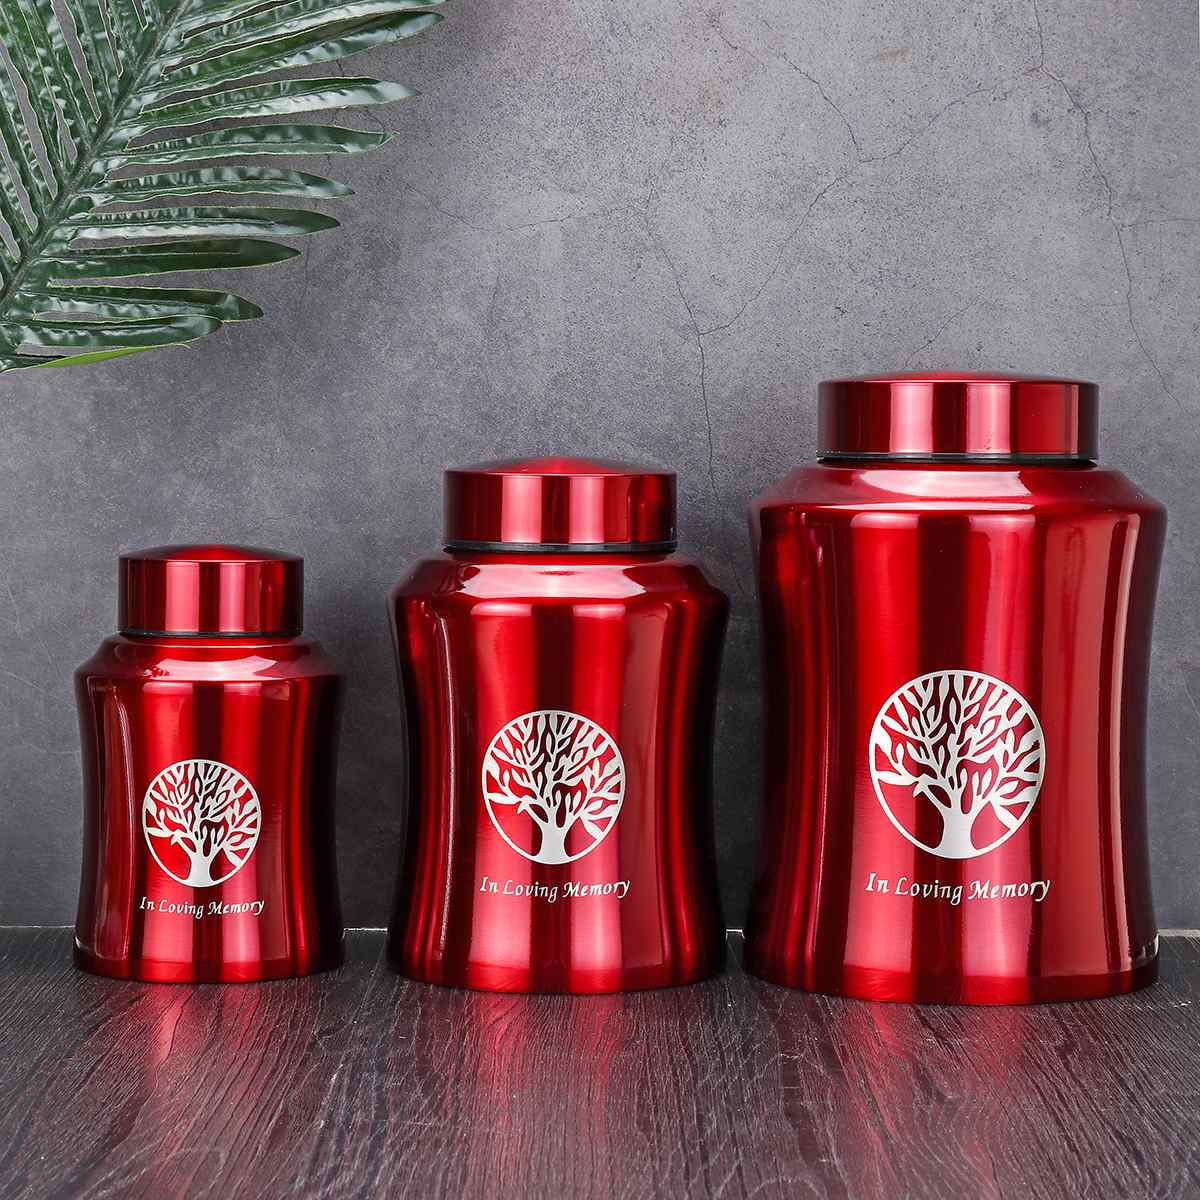 800ml /500/250ml Pet Memorial Urn Cremation Mini Urns for Pet/ Human Ashes Casket Funeral Stainless Steel Cremation Storage Jar